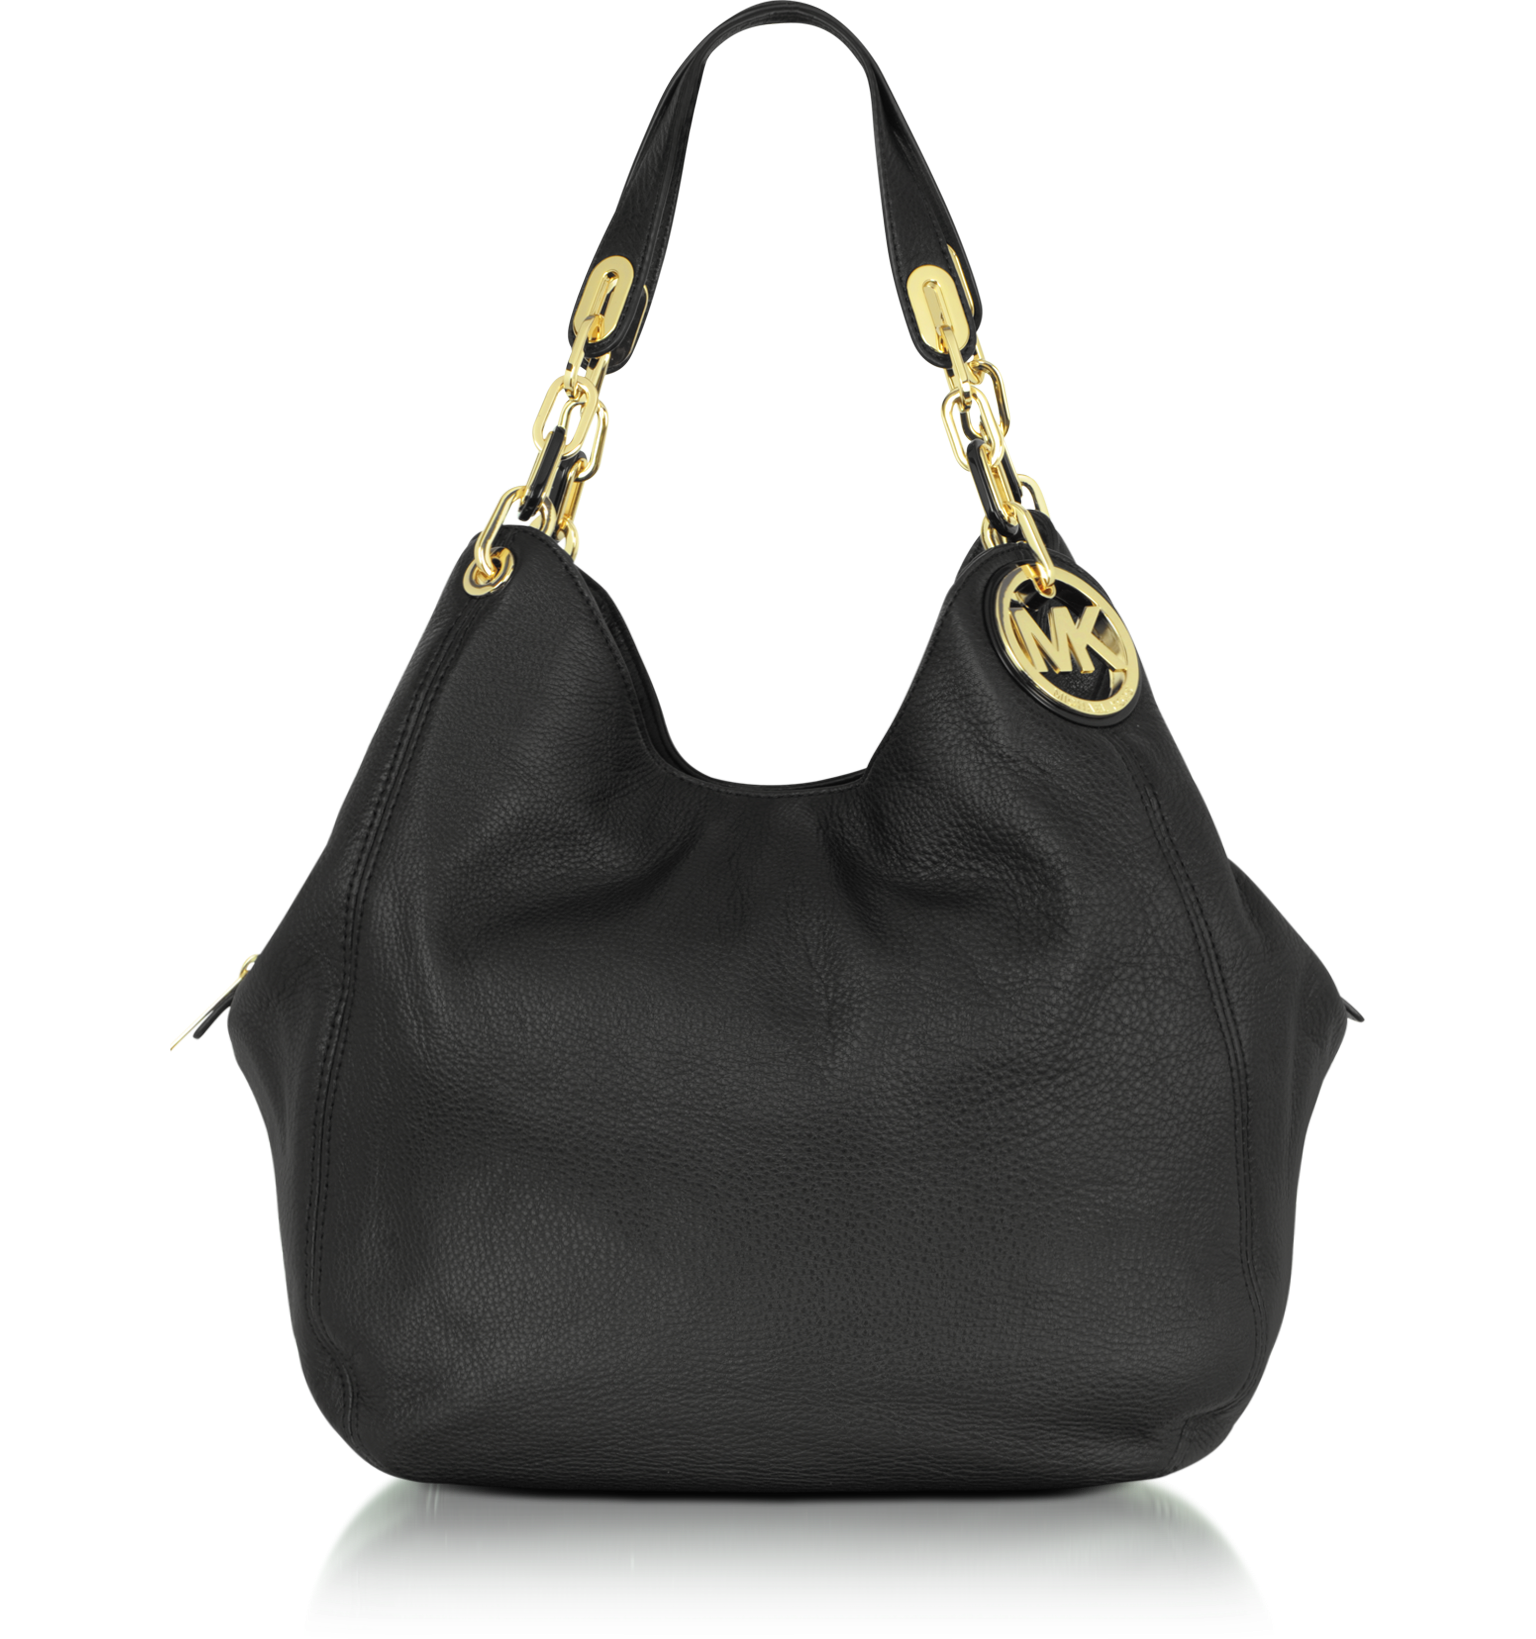 fulton large tote by michael kors